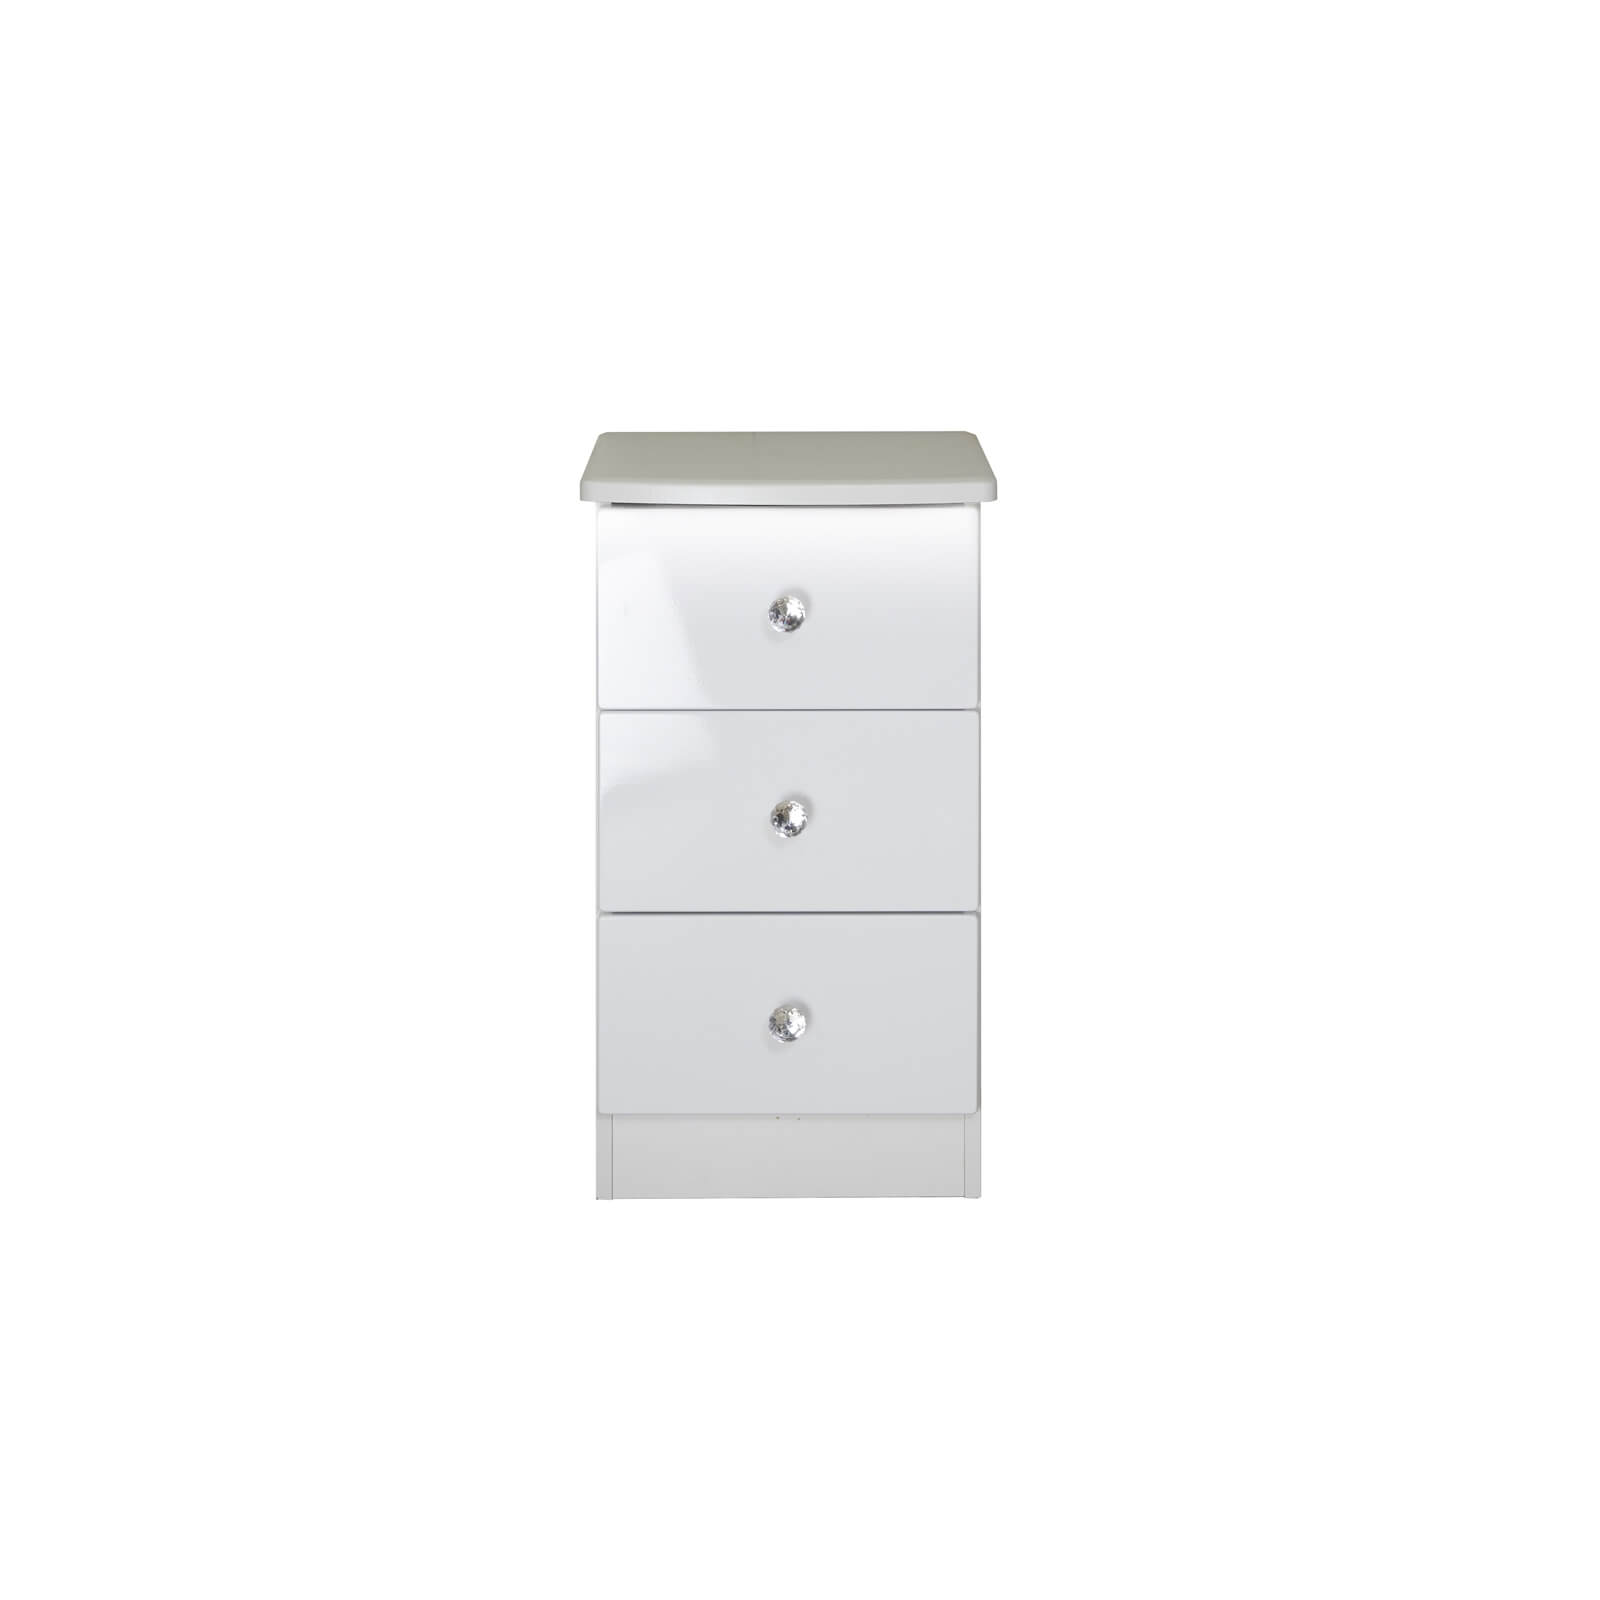 Lumo 3 Drawer Bedside Table with LED Lighting - White